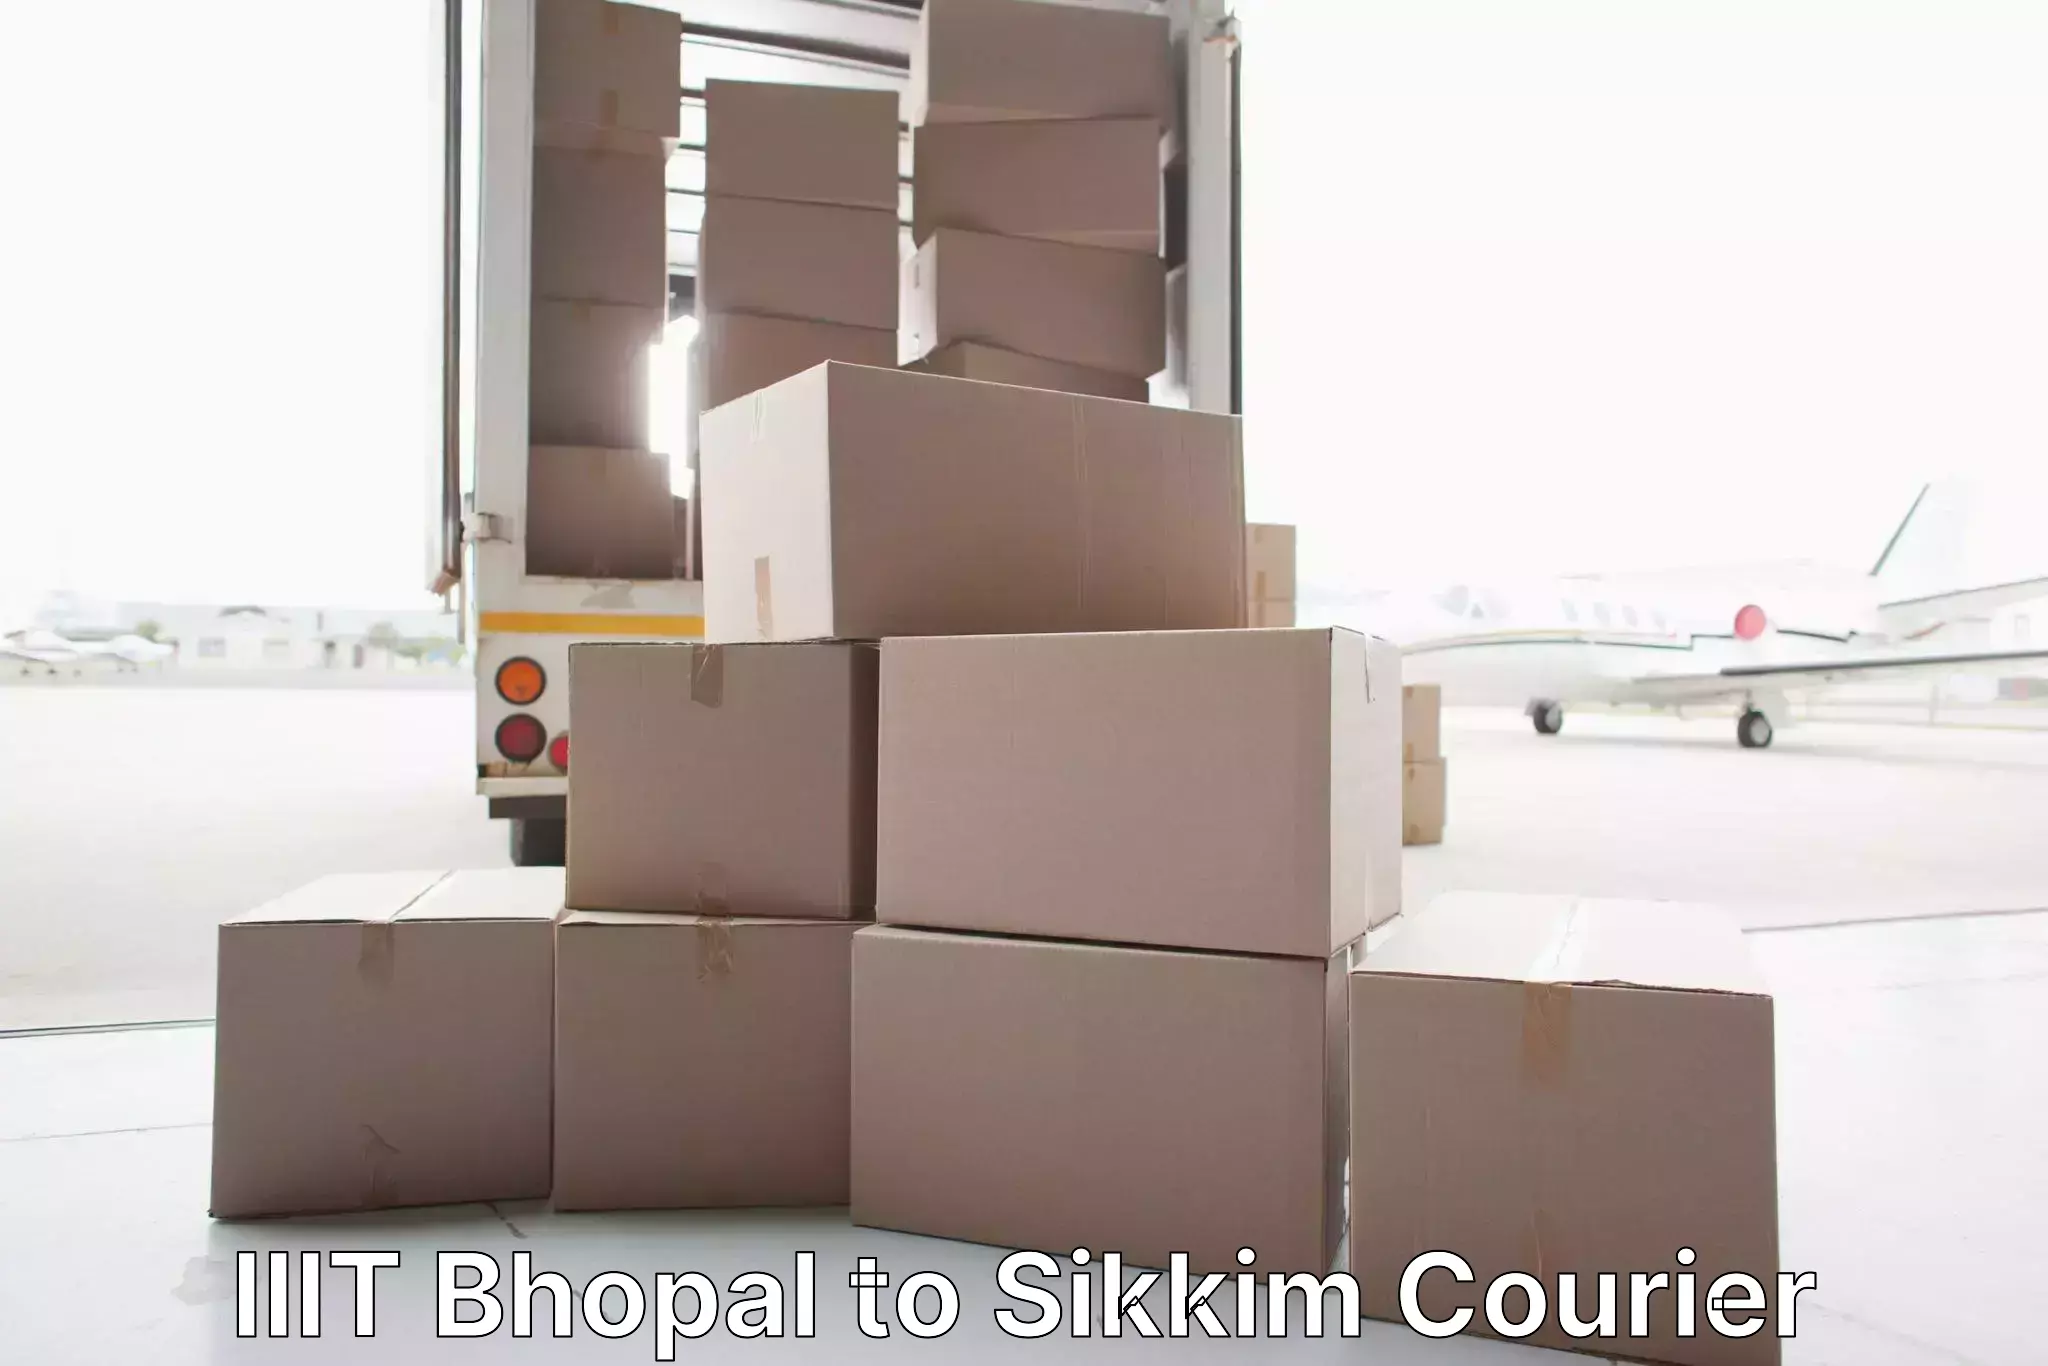 Furniture transport company IIIT Bhopal to South Sikkim